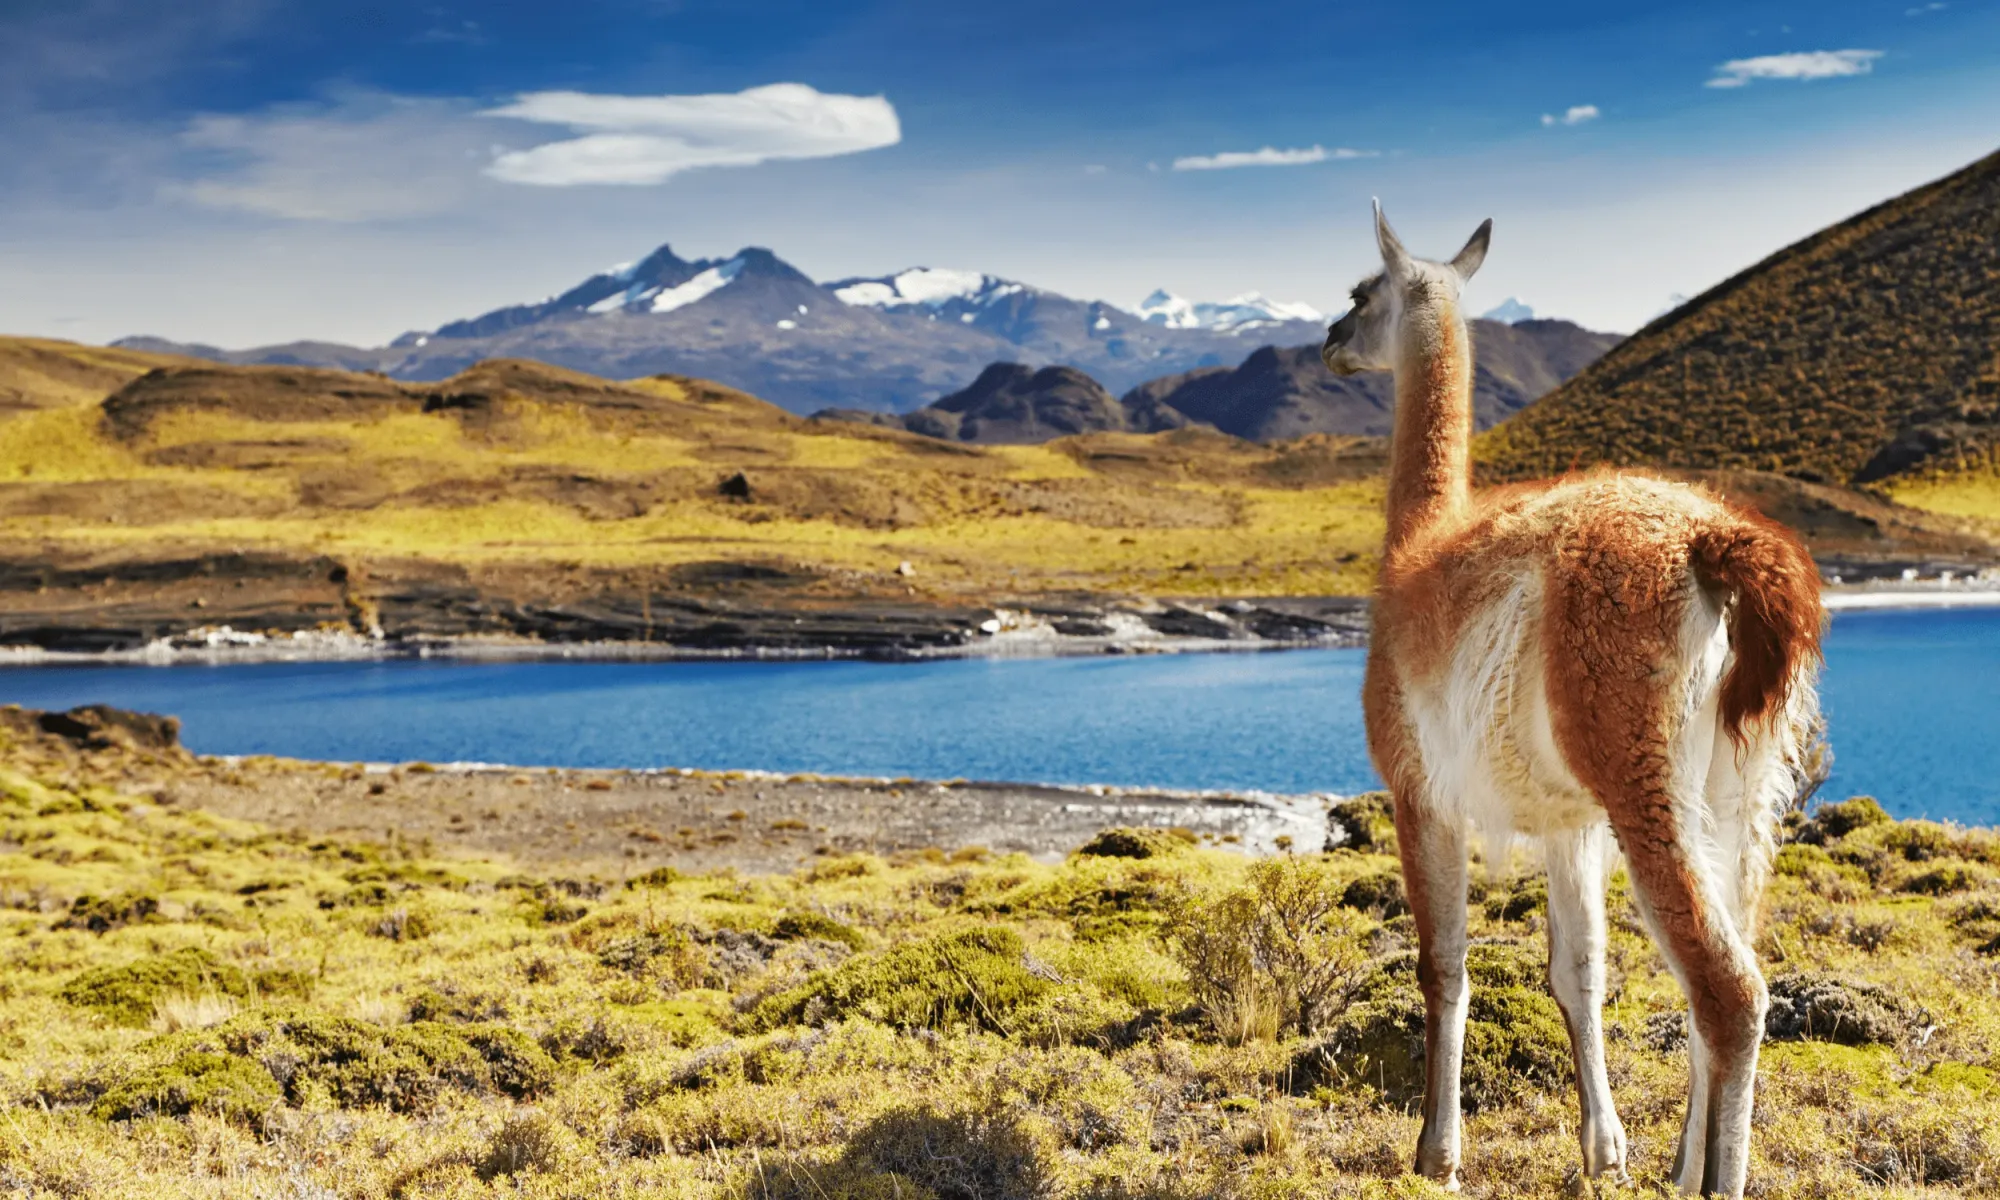 Lama on the mountains in Argentina